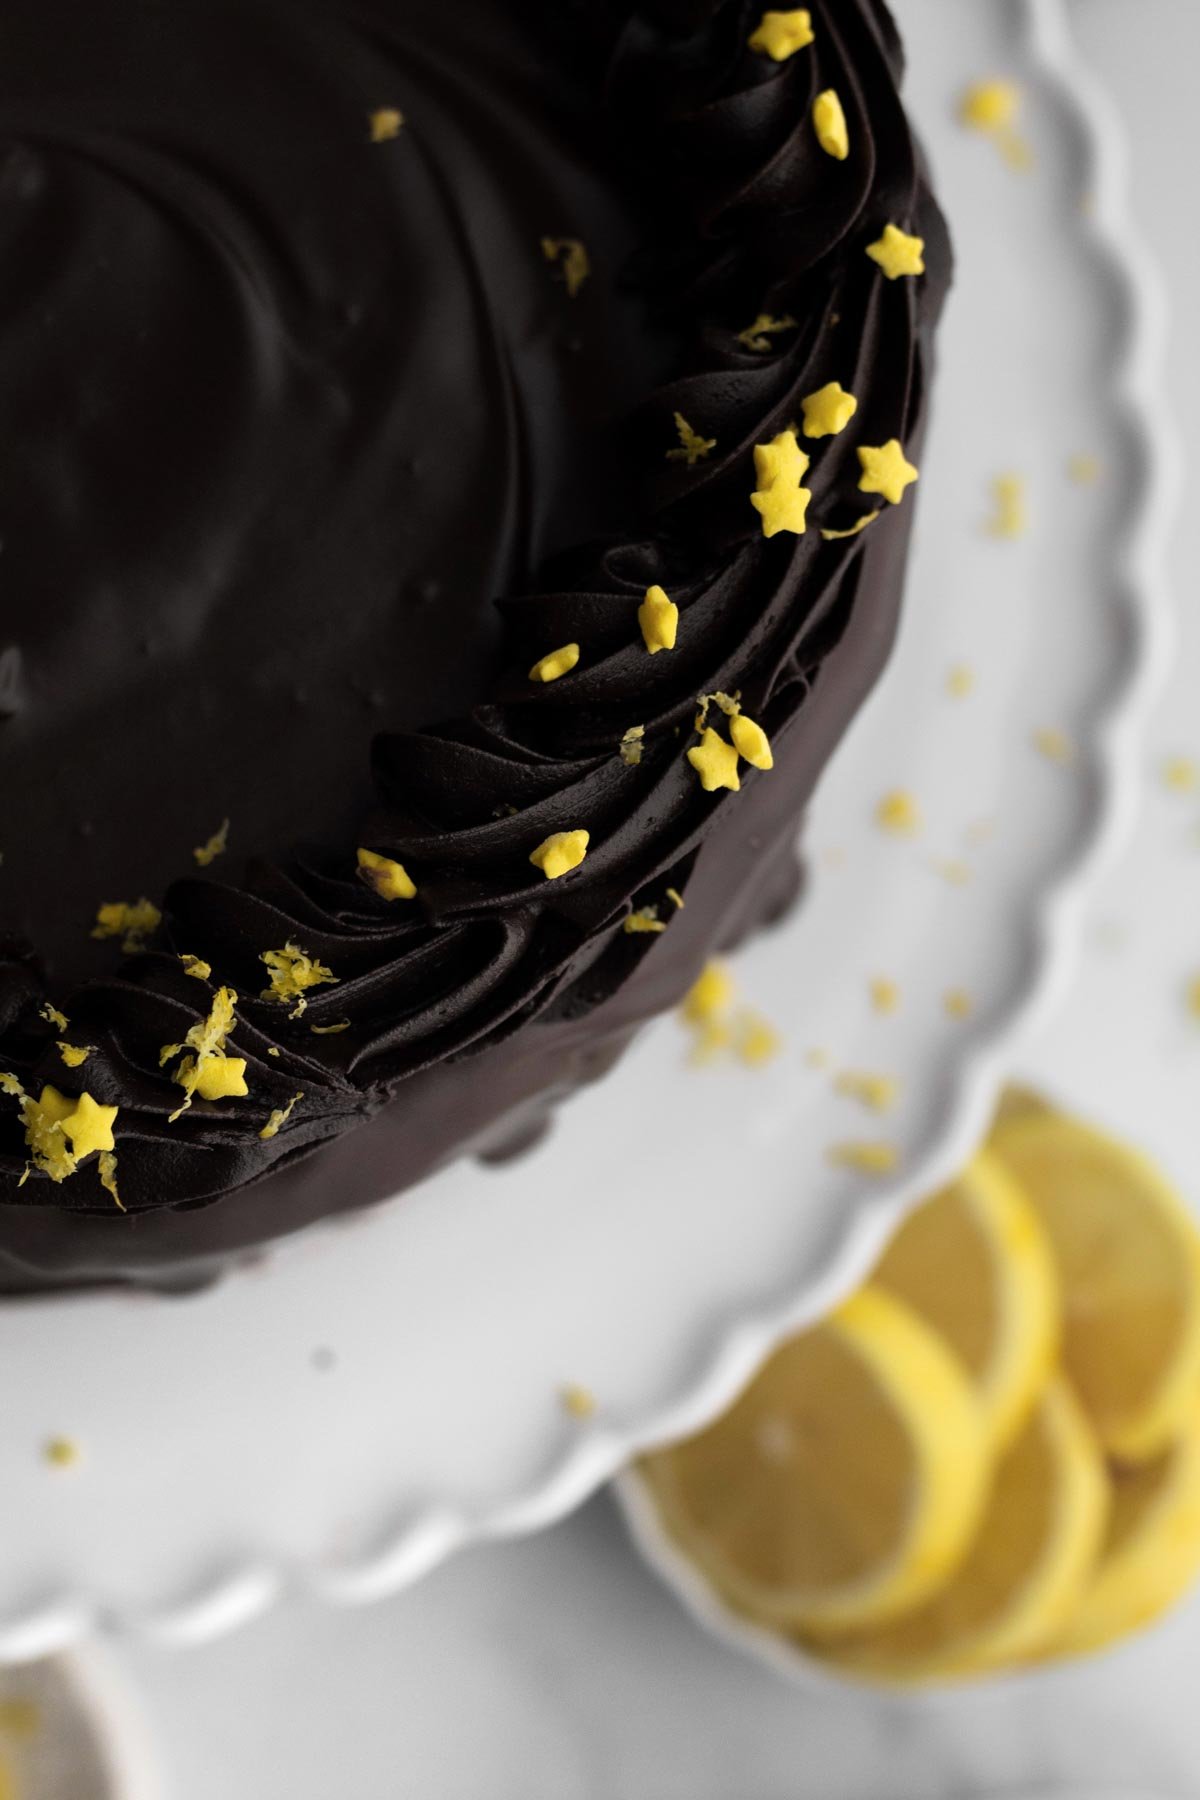 The ribbons of frosting adorned with yellow star sprinkles and lemon zest.